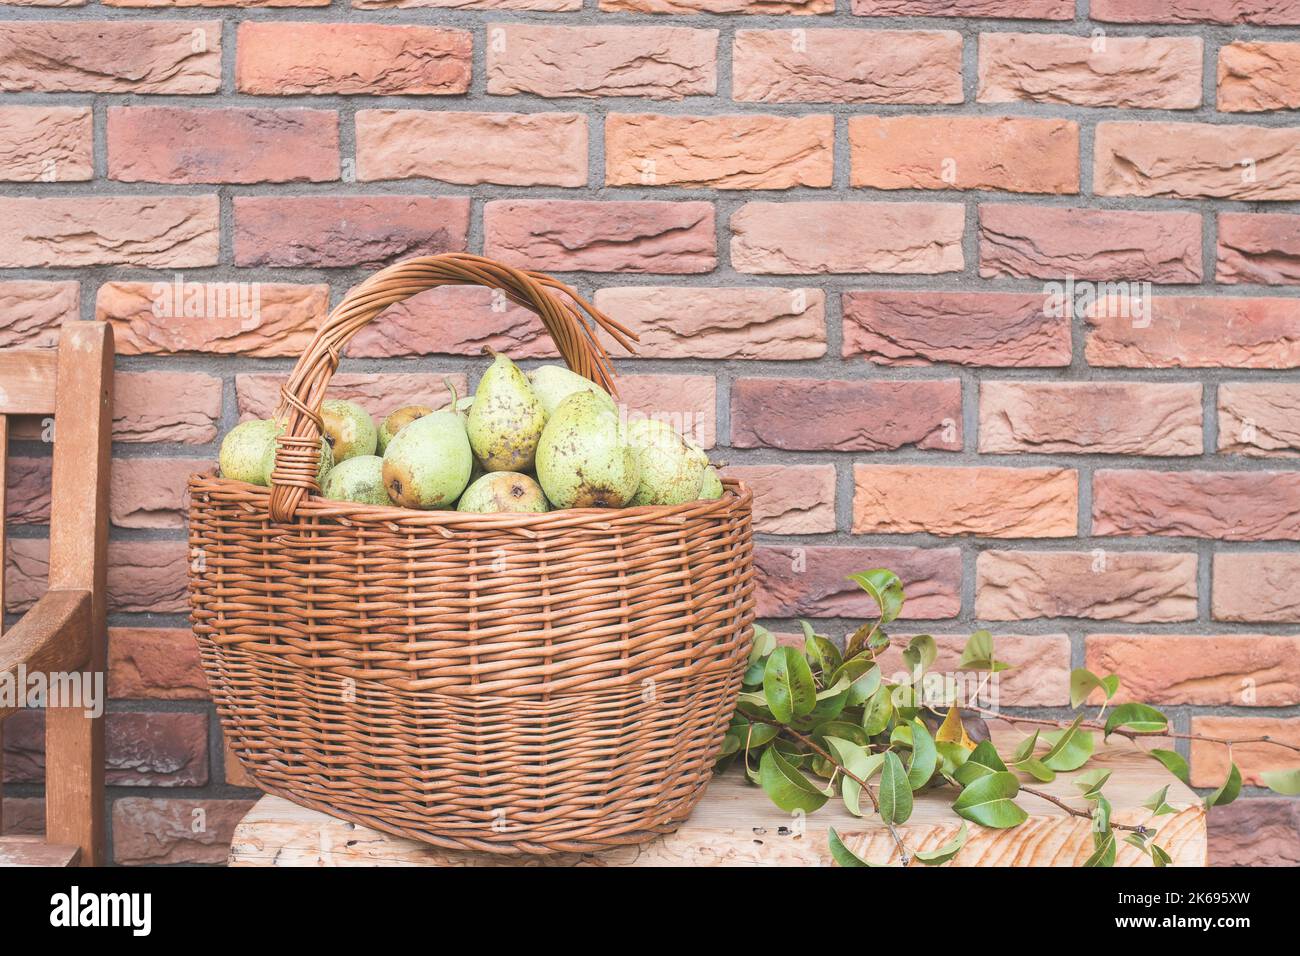 Pears from own garden in wicker basket with copy space for text. Home harvest, fresh picked organic fruits. Brick wall background. Stock Photo